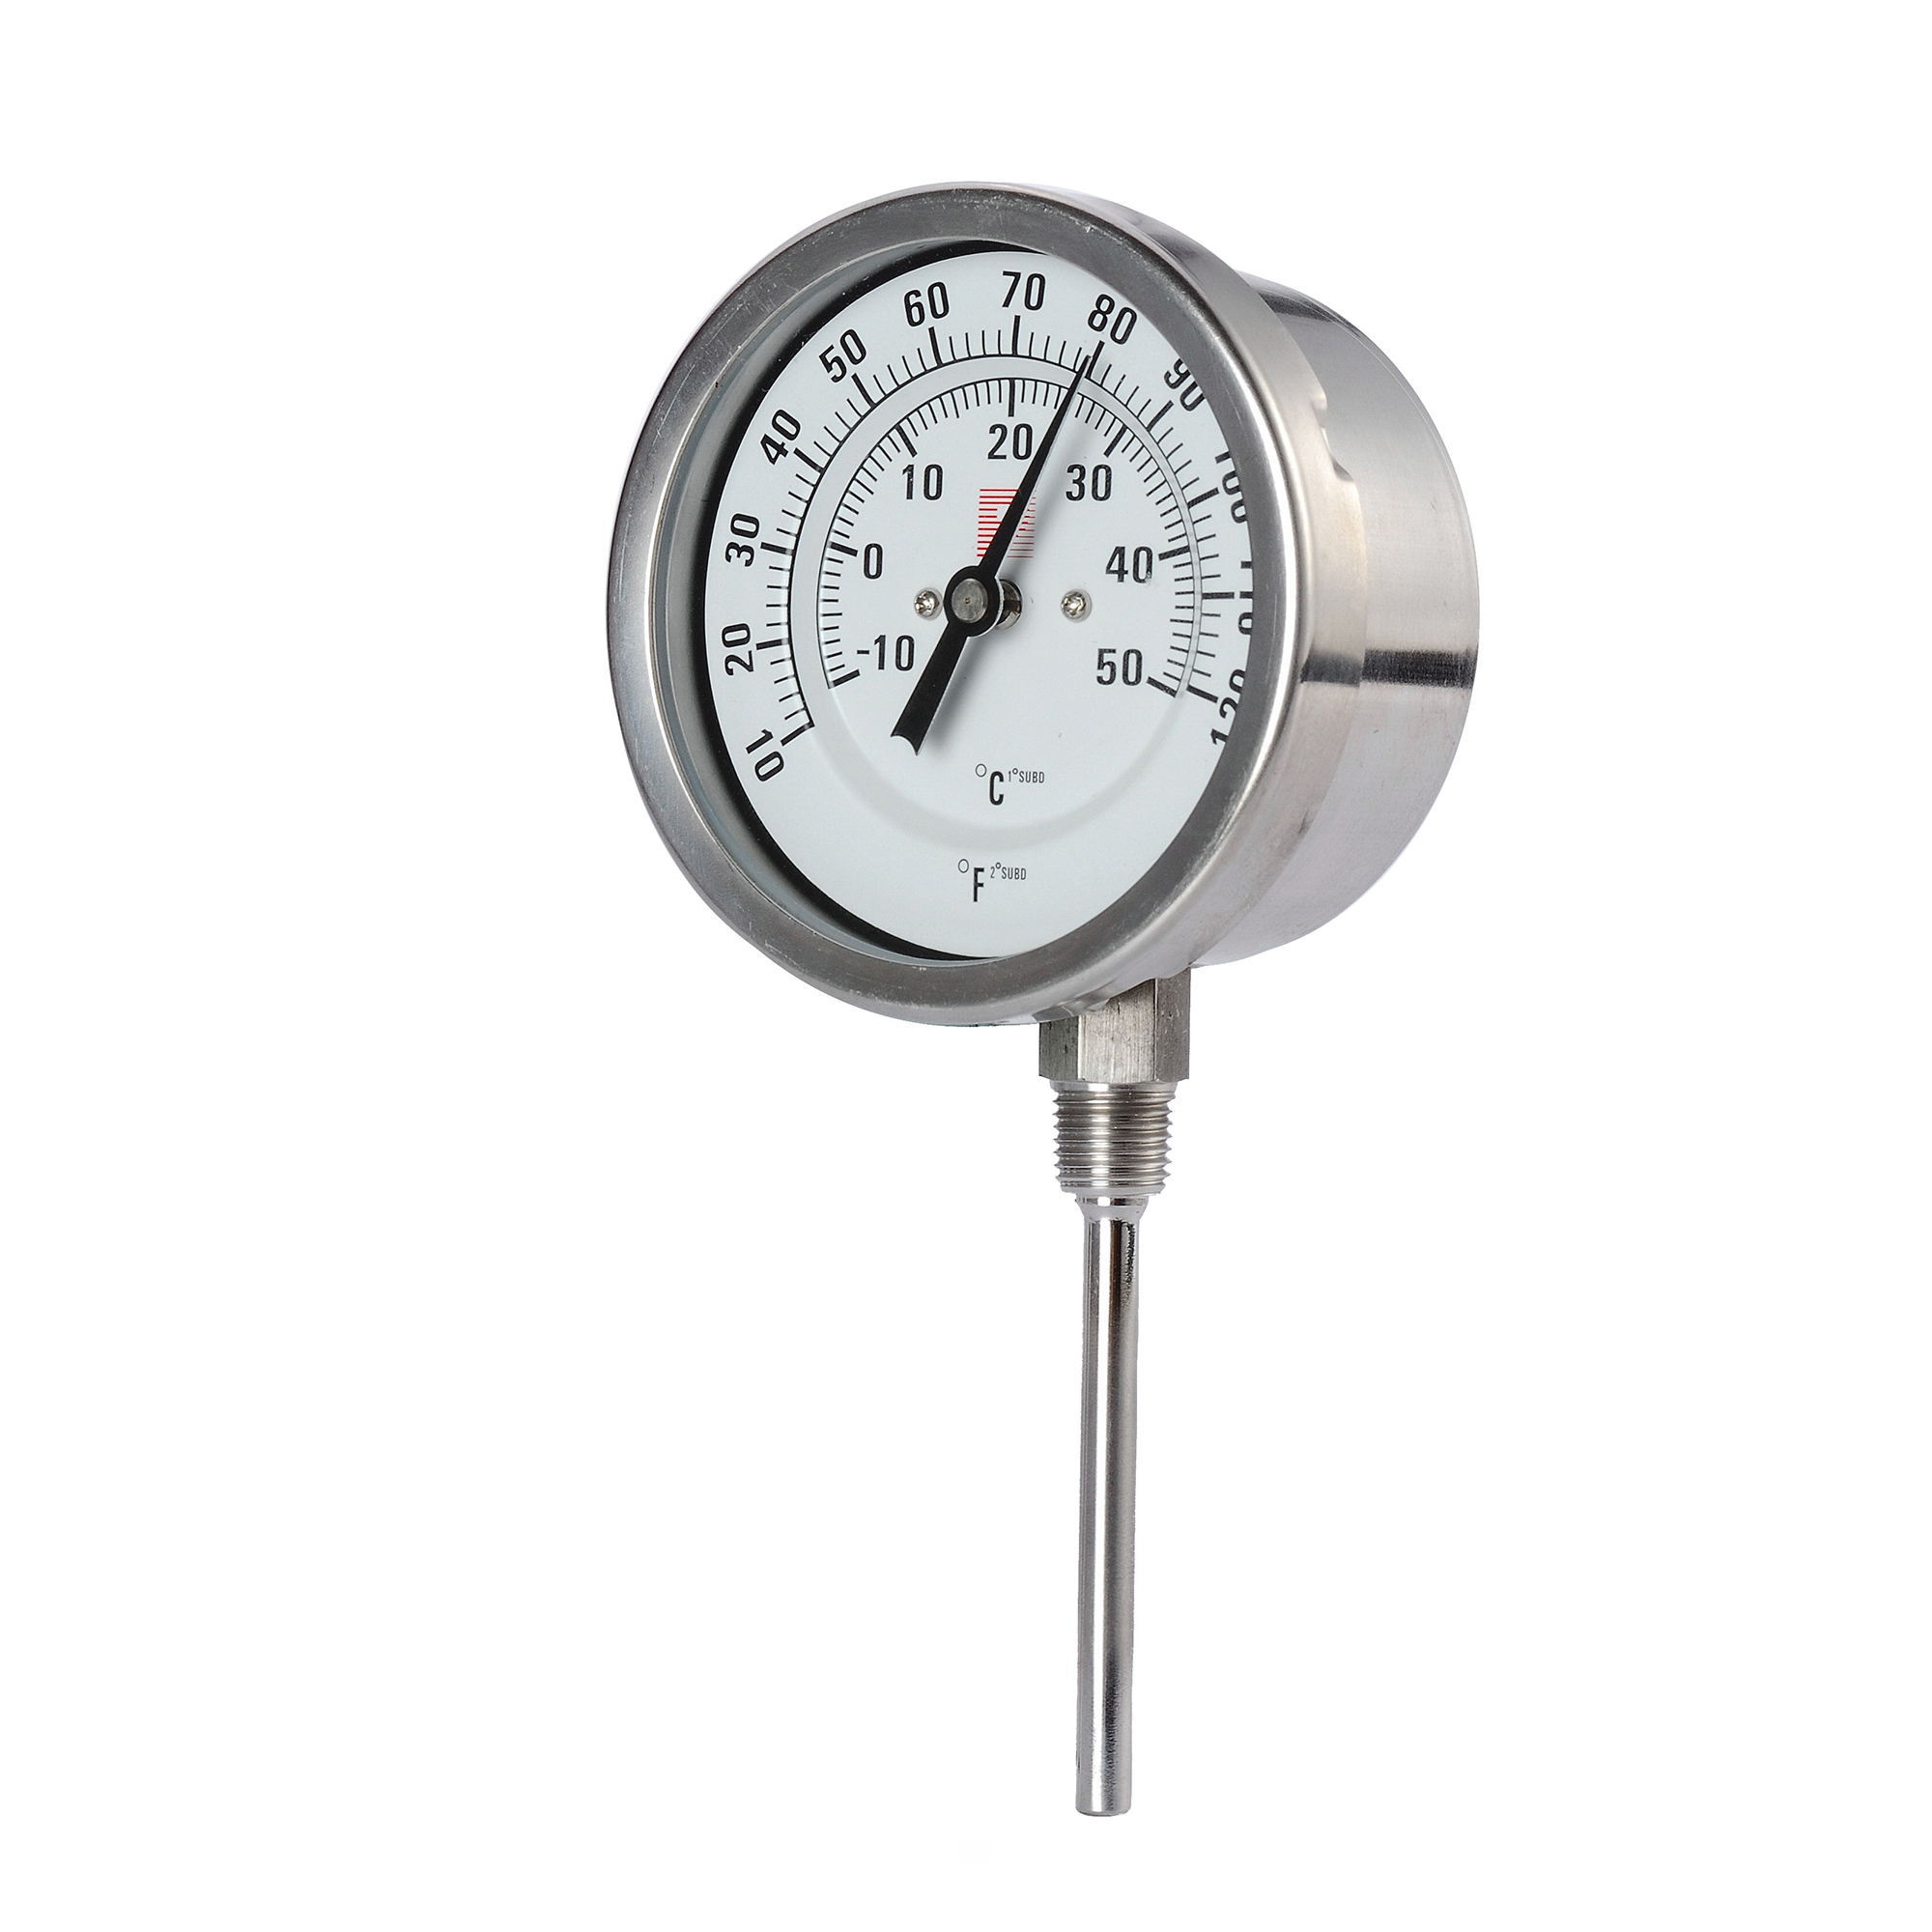 Stainless steel bimetal Thermometer, C100 SERIES